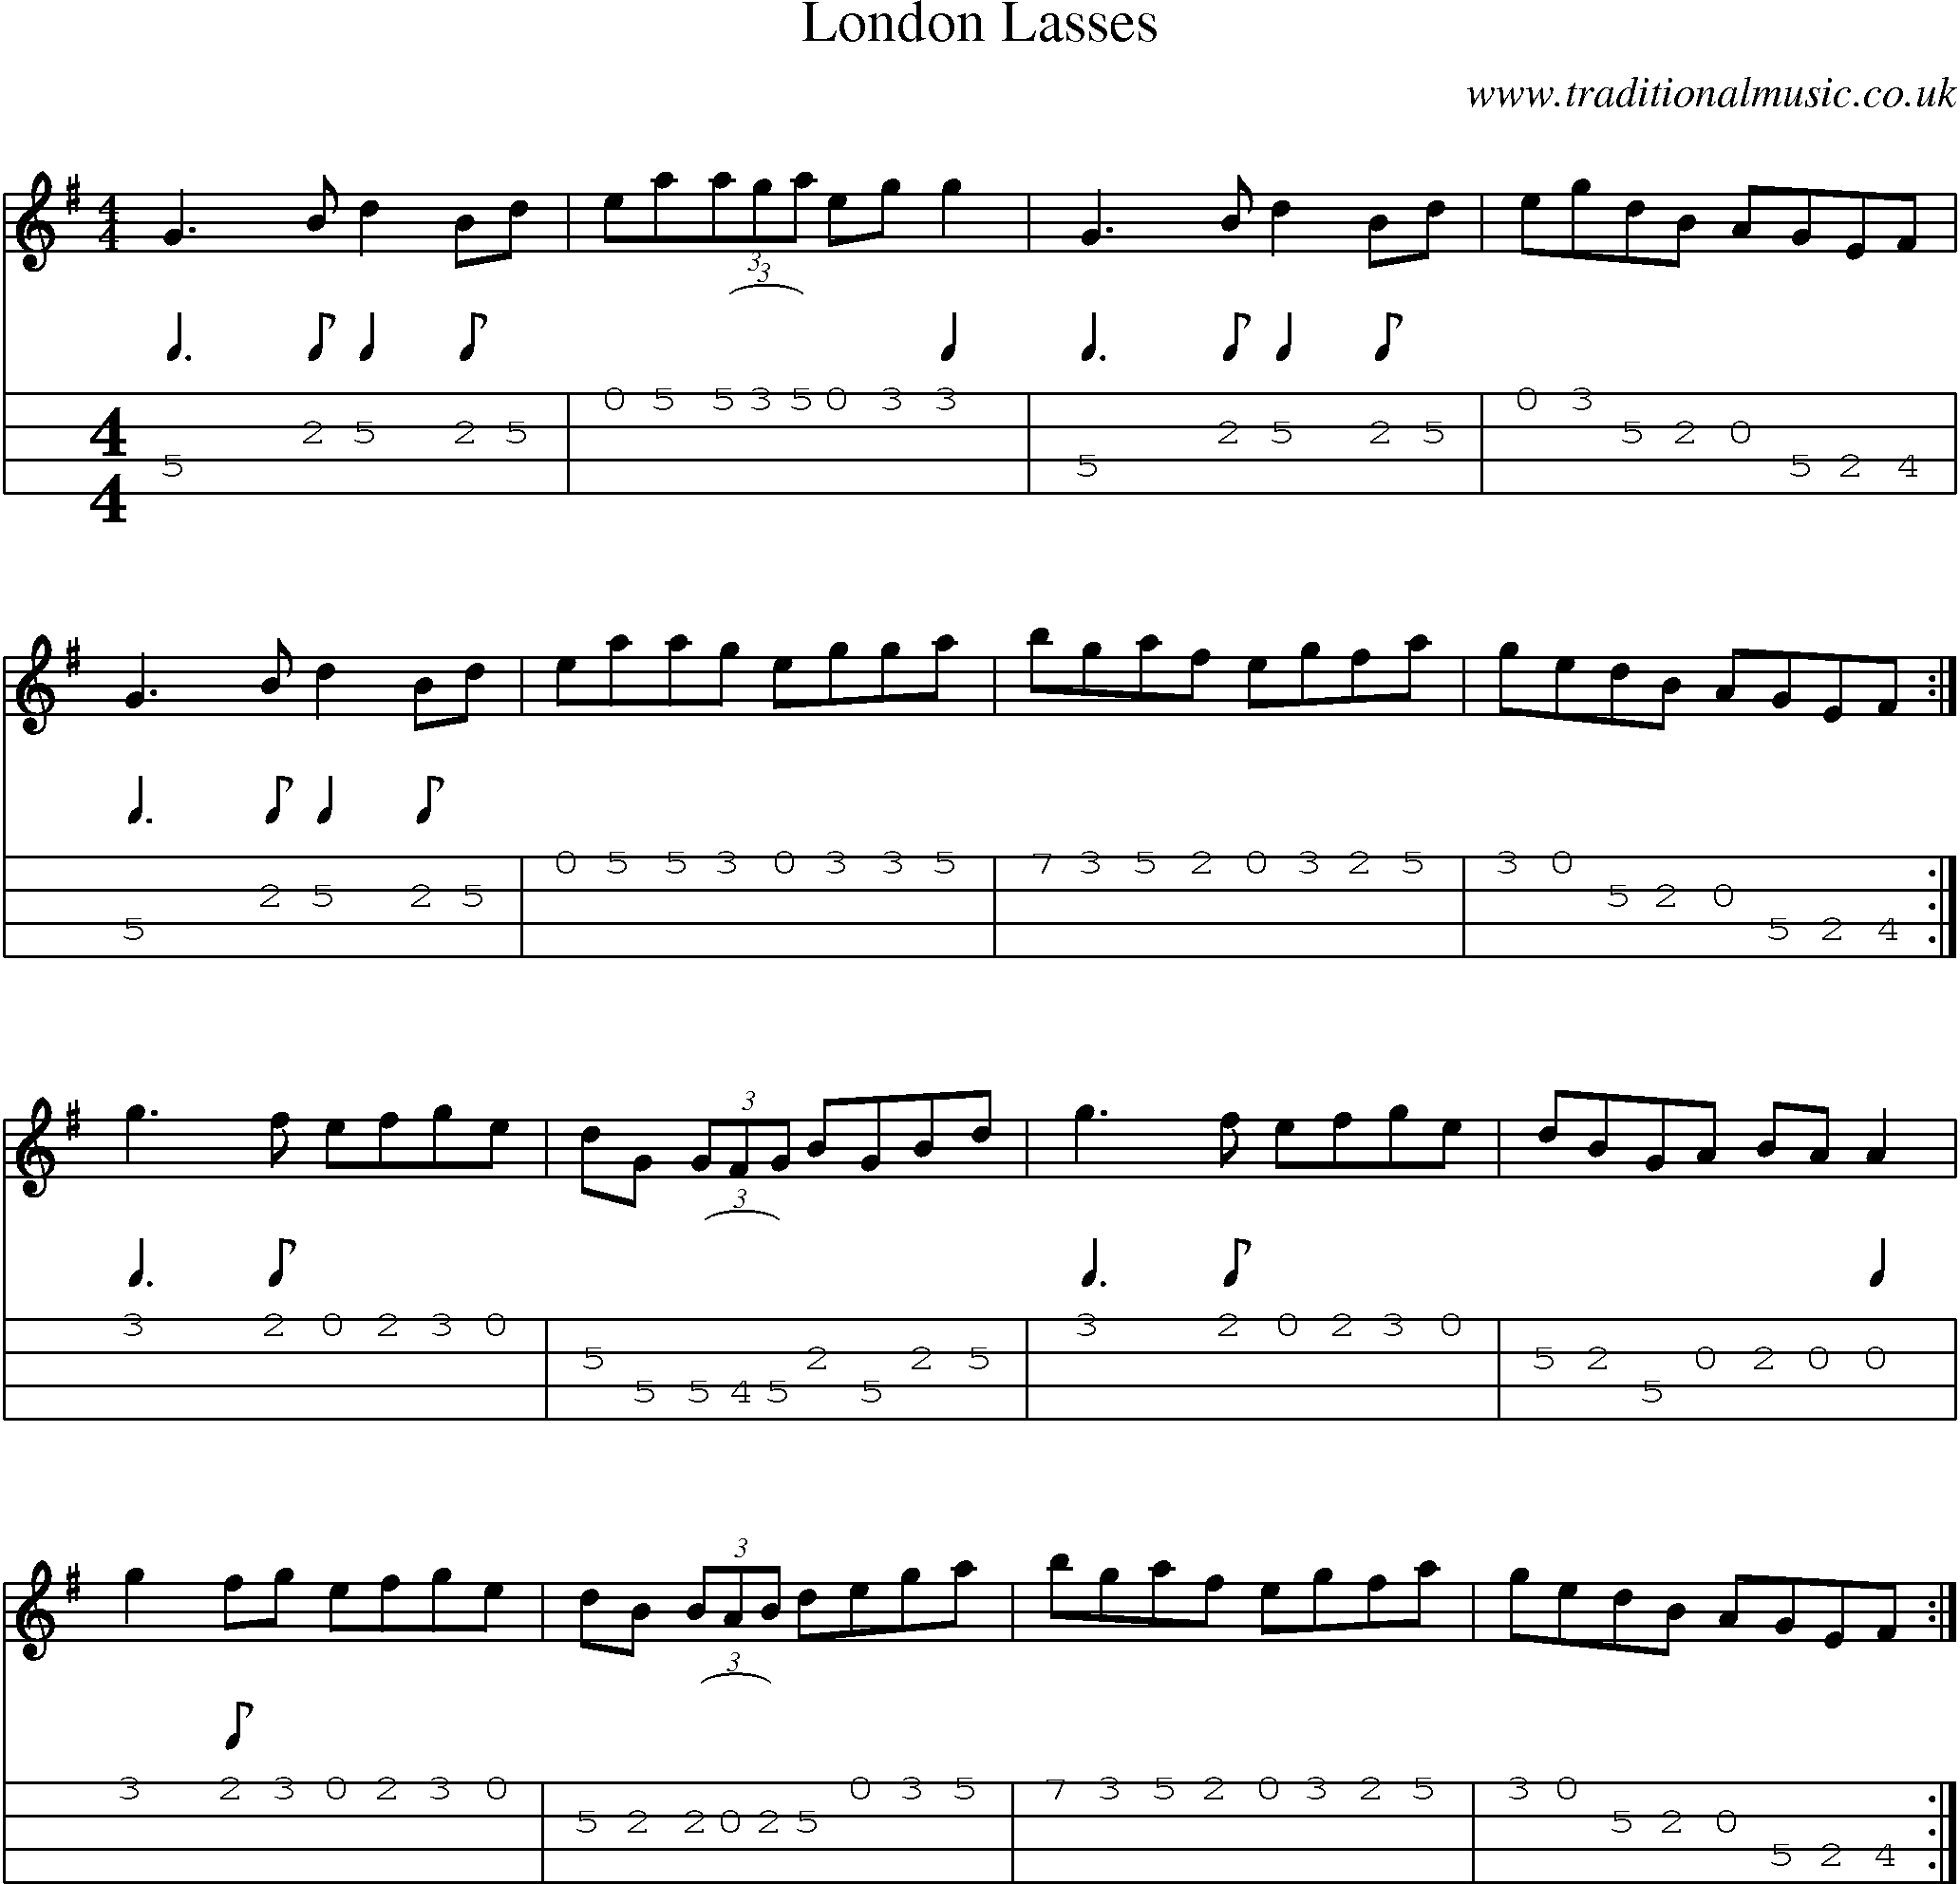 Music Score and Mandolin Tabs for London Lasses